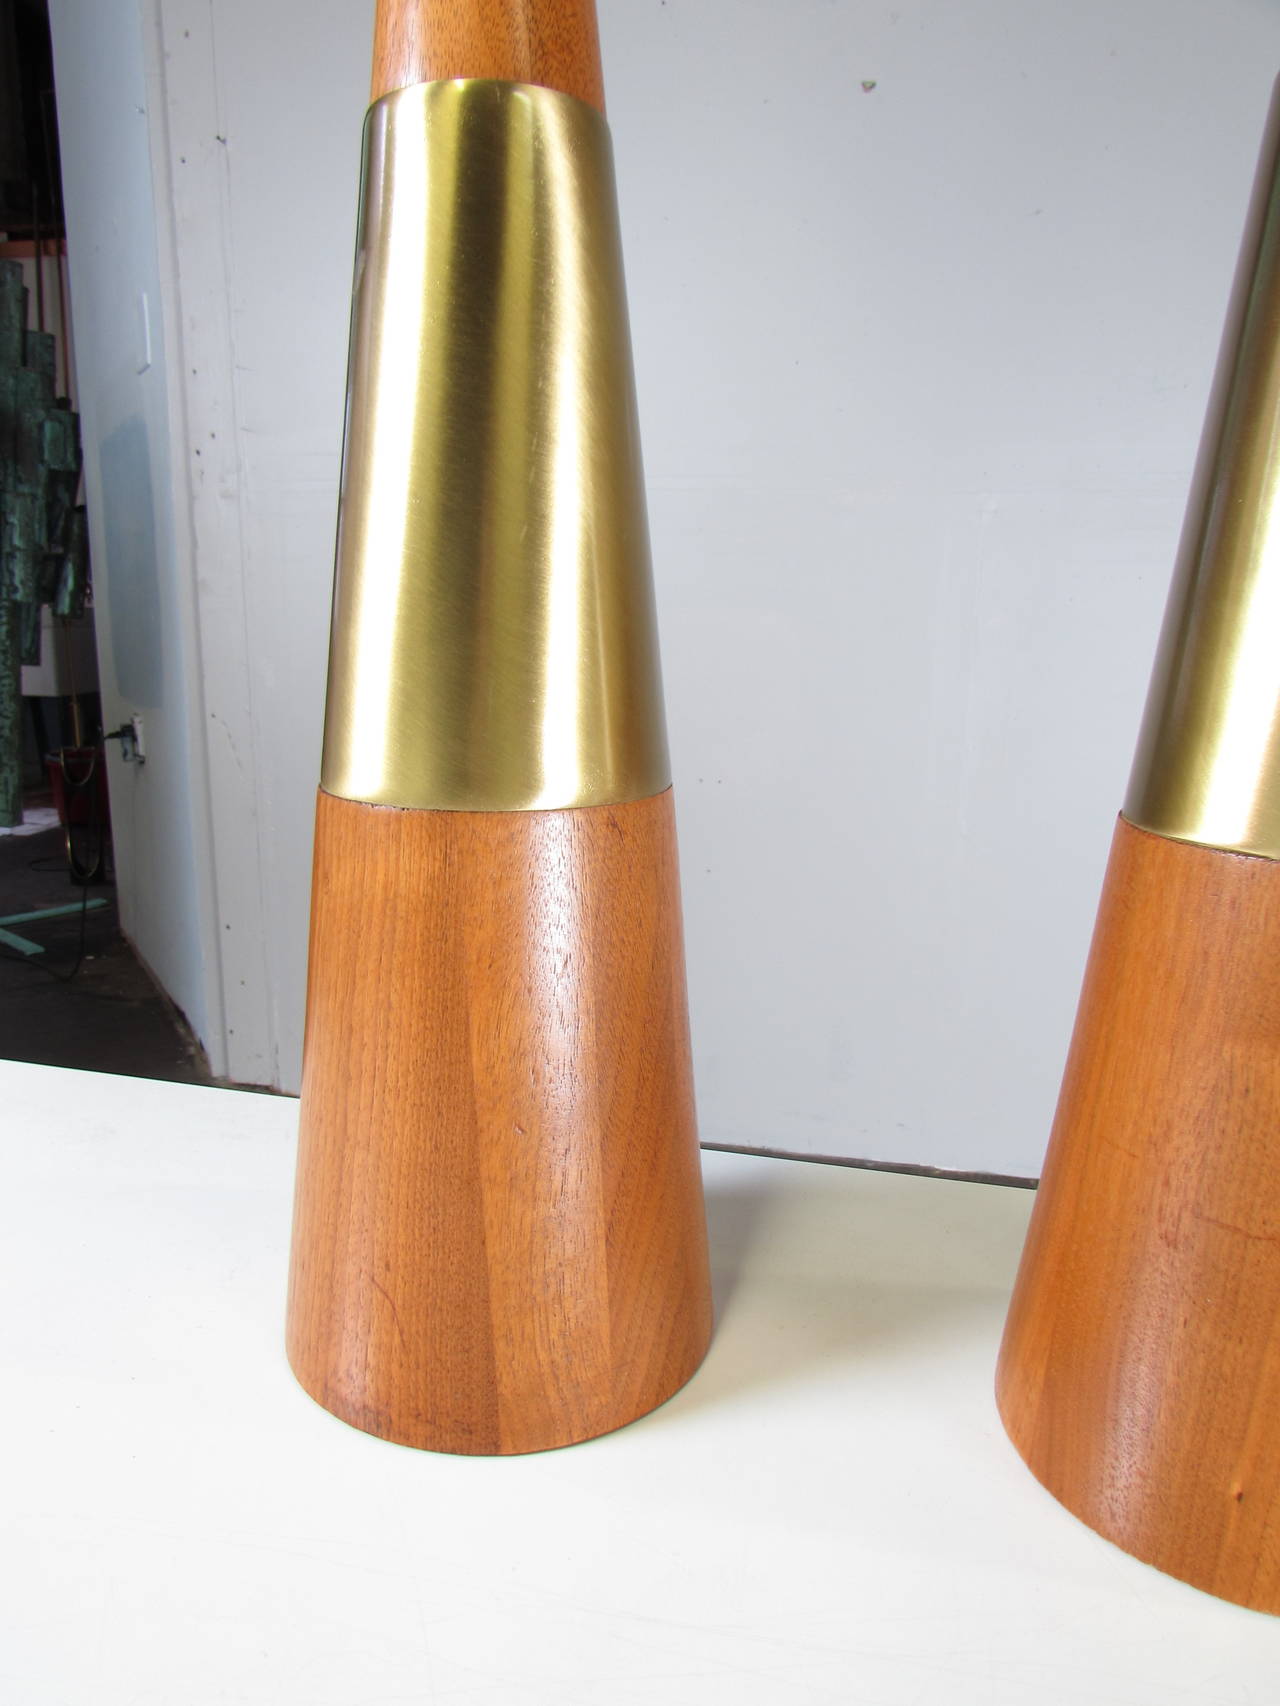 Immaculate pair of brass and walnut table lamps by Tony Paul for Westwood. These lamps are in excellent confident. One small blemish on the brass as pictured. 

25